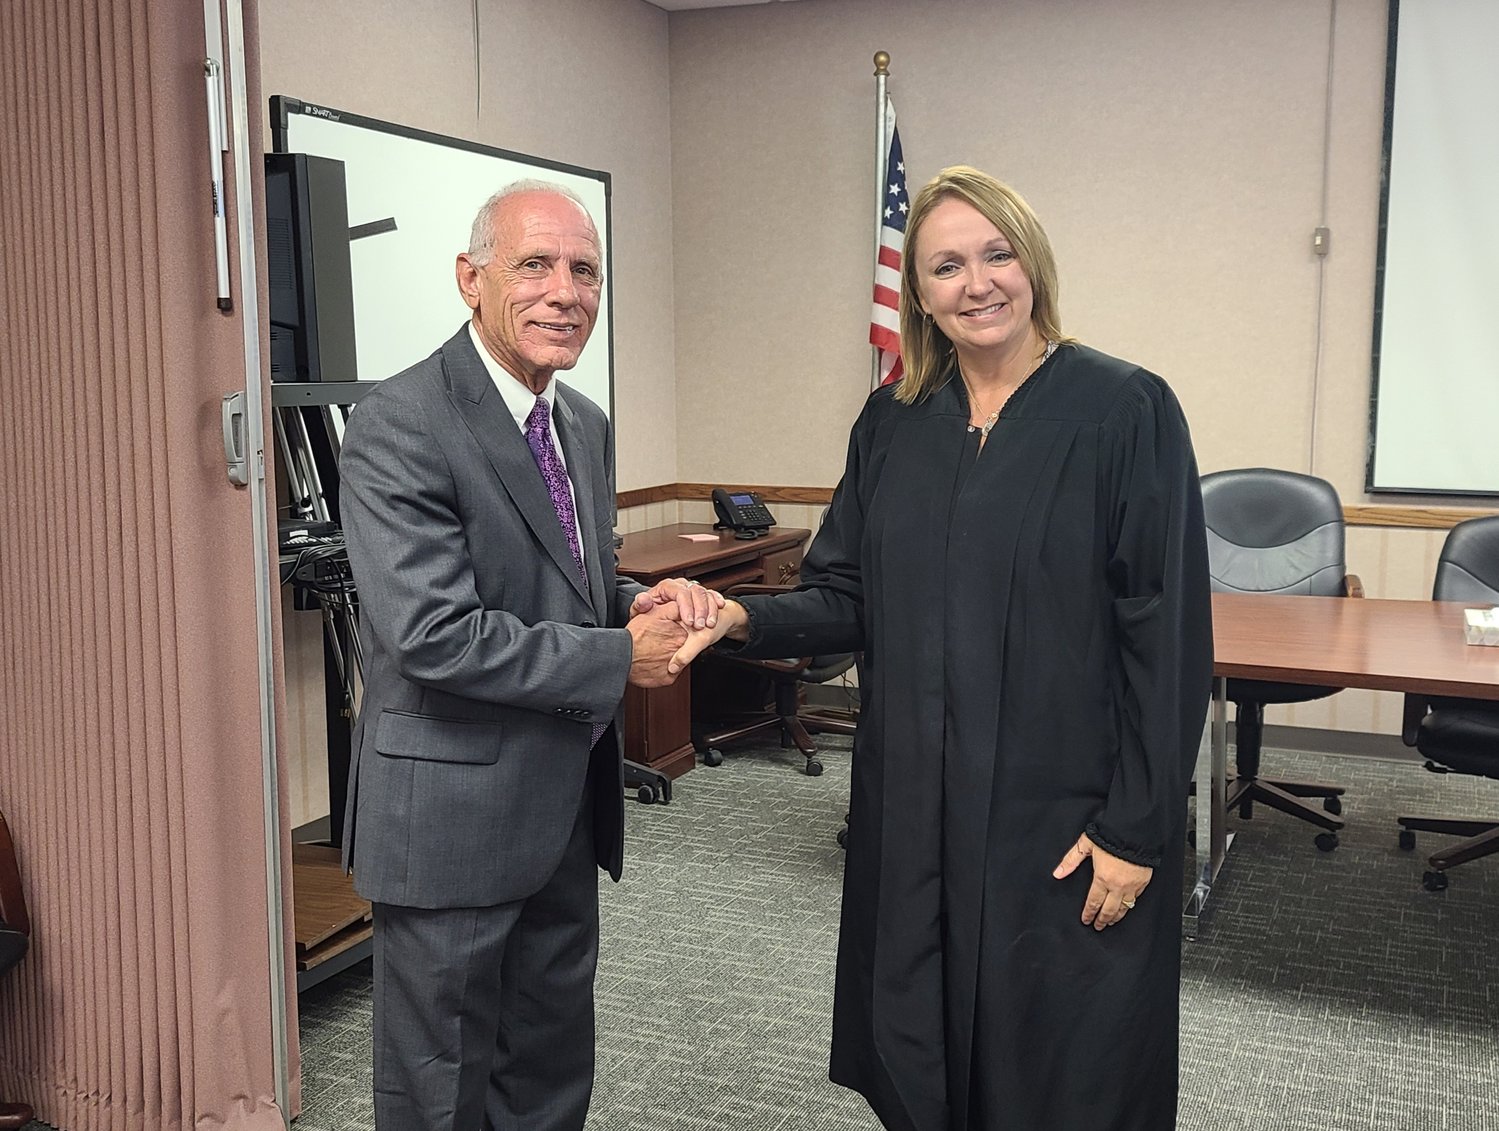 Chief Judge Lori Fleming, right, congratulates newly appointed magistrate judge Joe Gordon Gregory on his new position with the district.